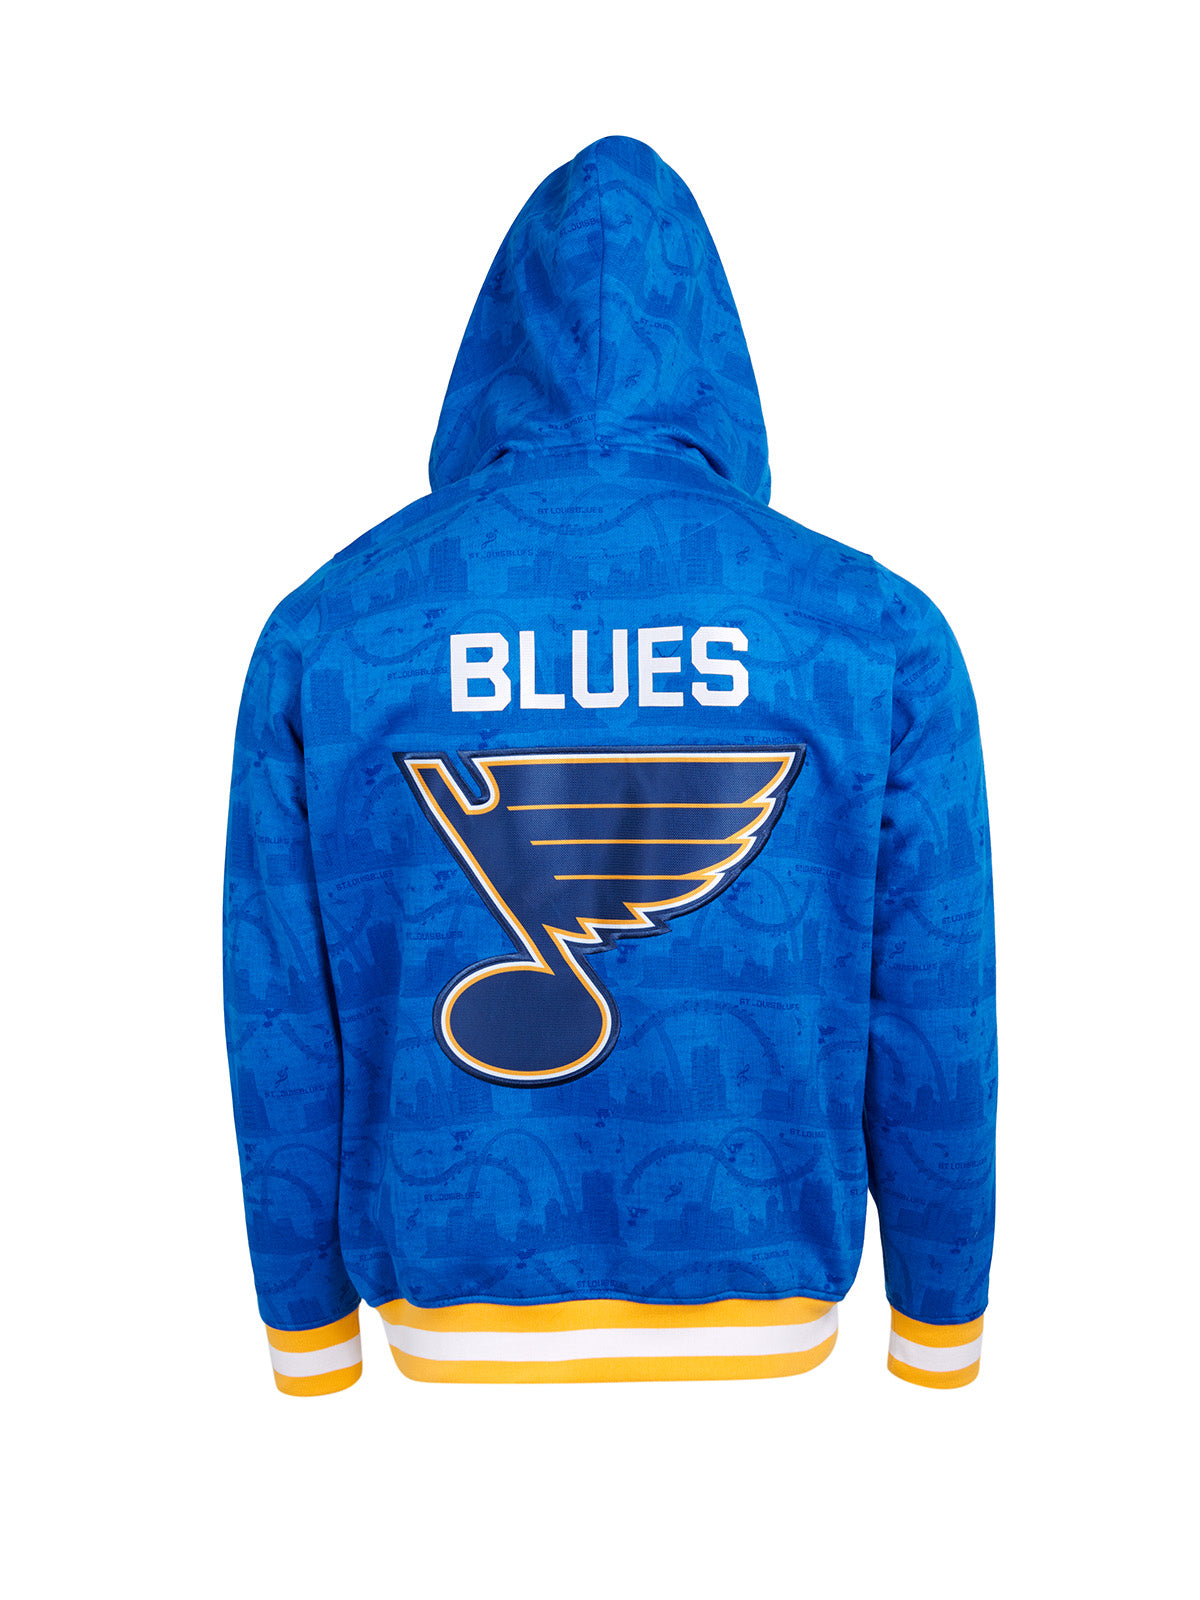 St. Louis Blues Hoodie - Show your team spirit, with the iconic team logo patch centered on the back, and proudly display your St. Louis Blues support in their team colors with this NHL hockey hoodie.